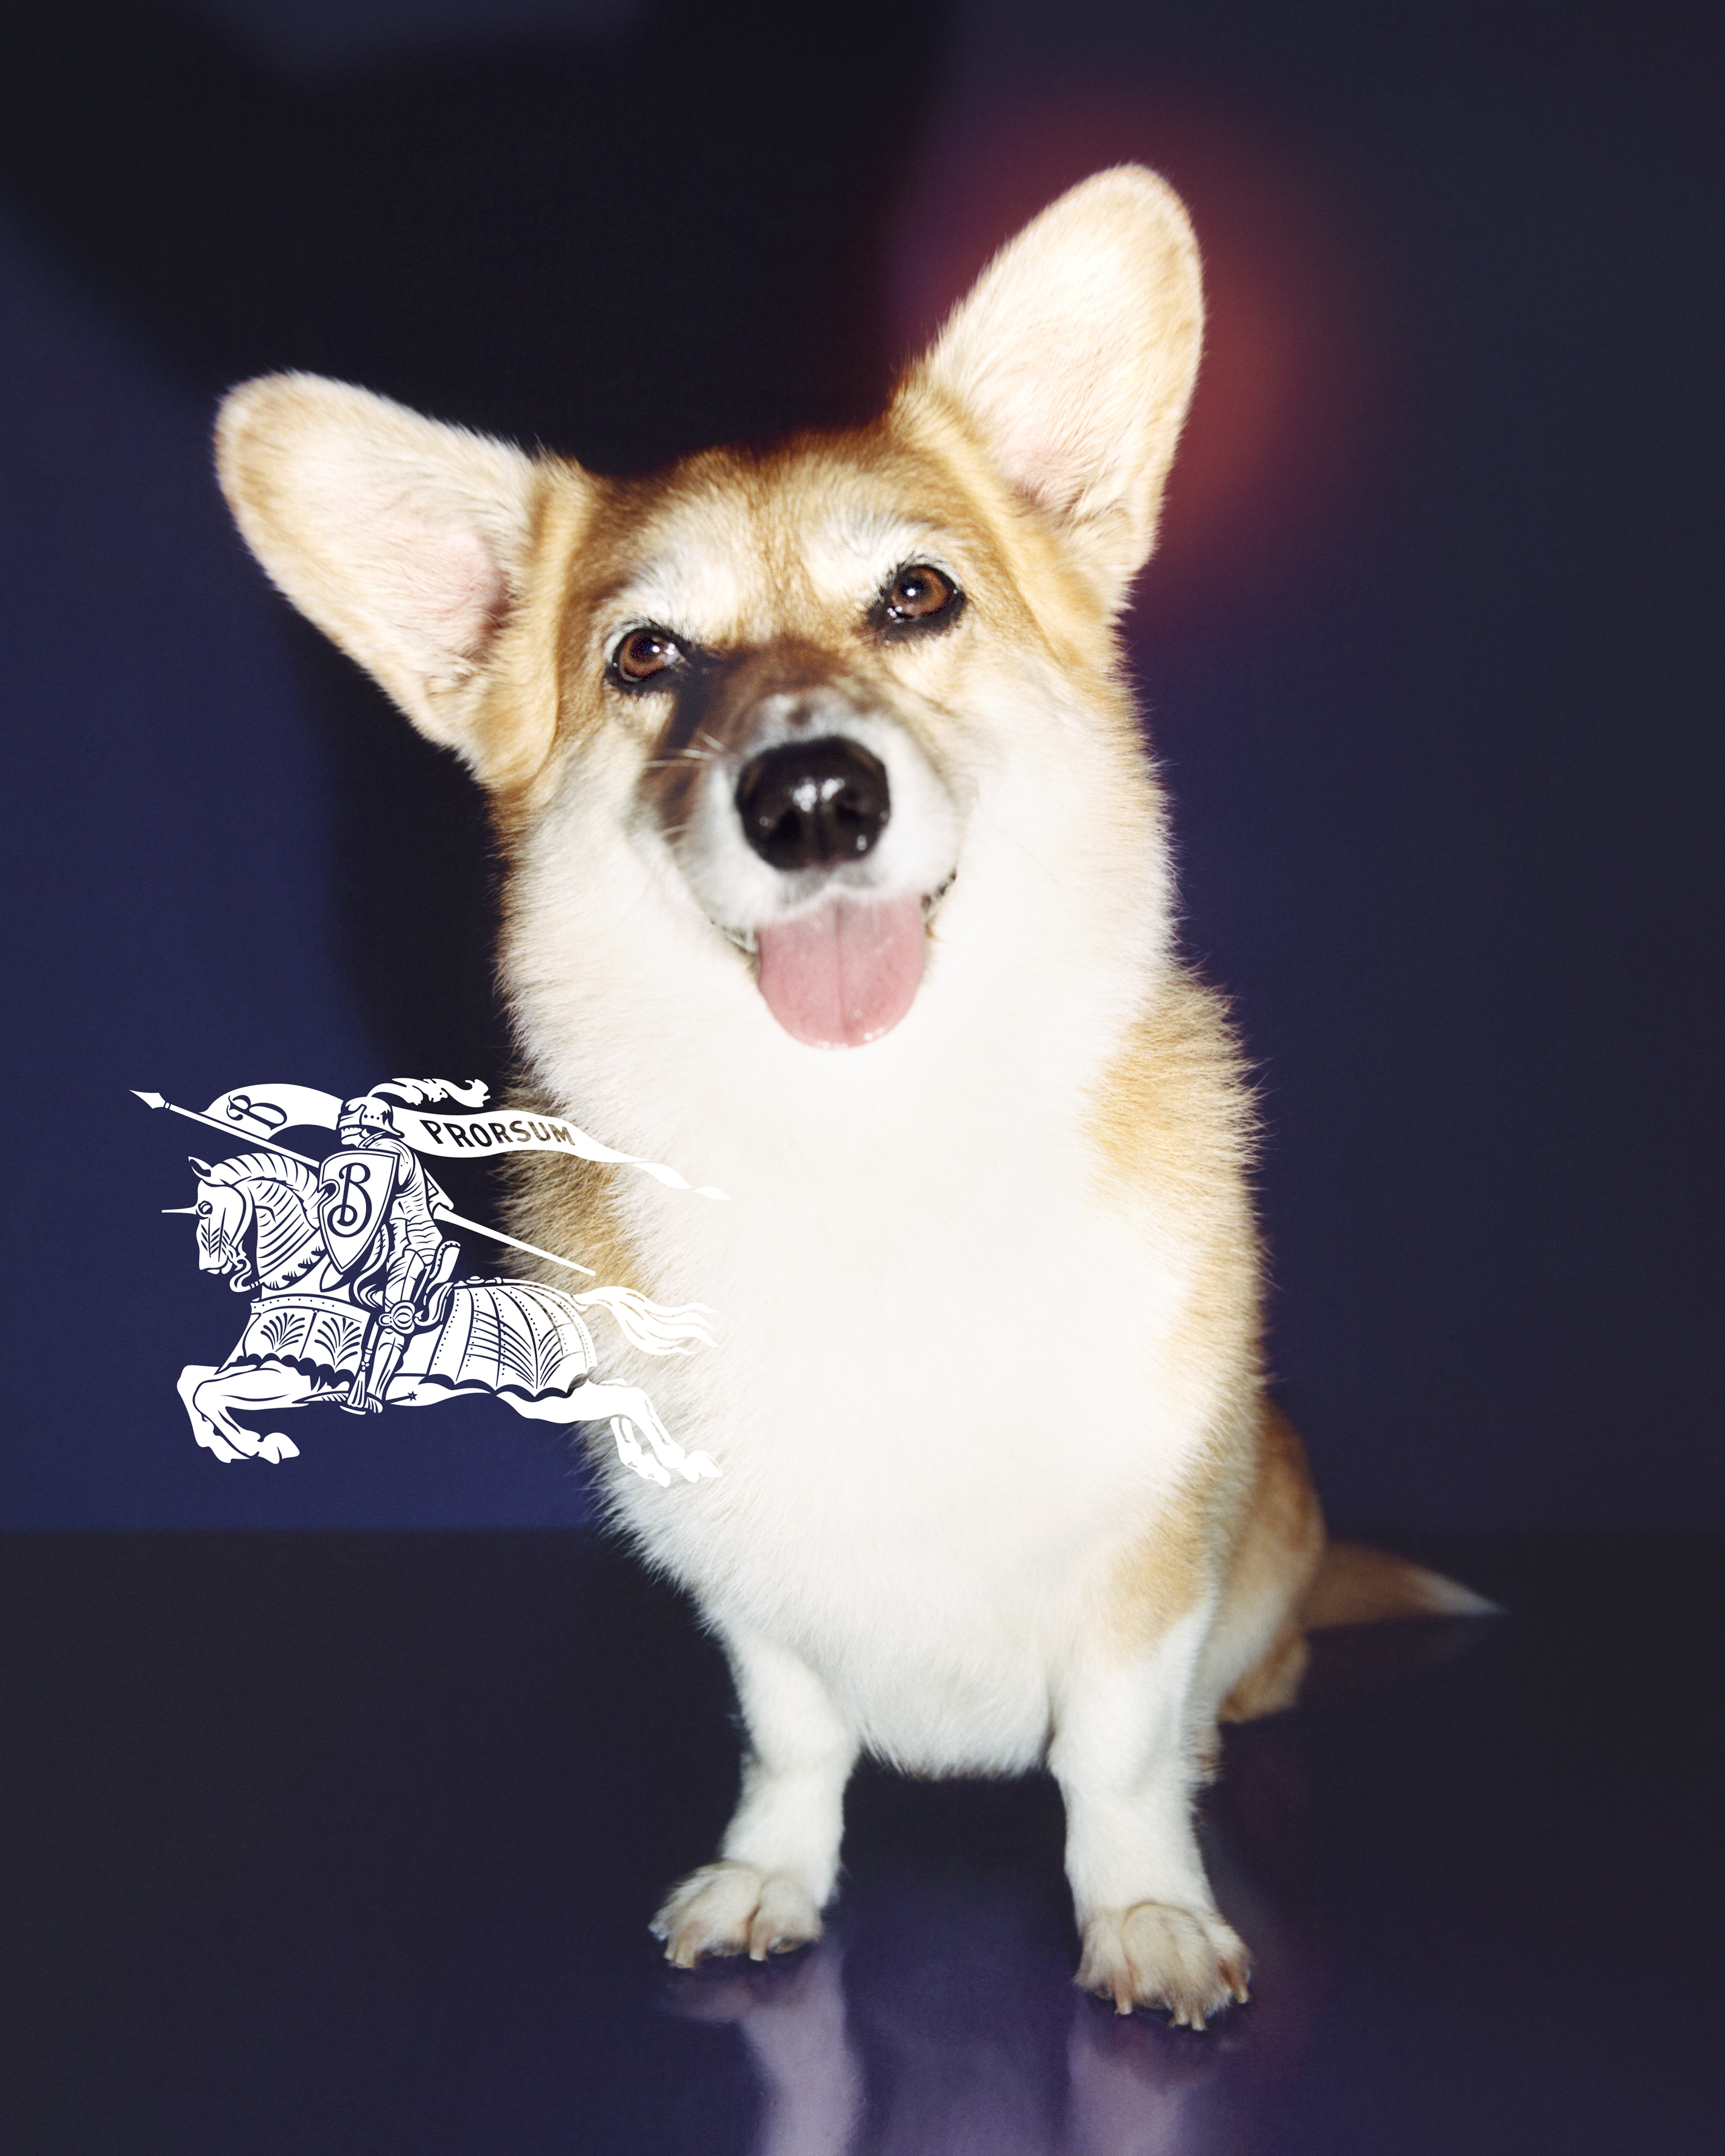 A corgi also features in the campaign